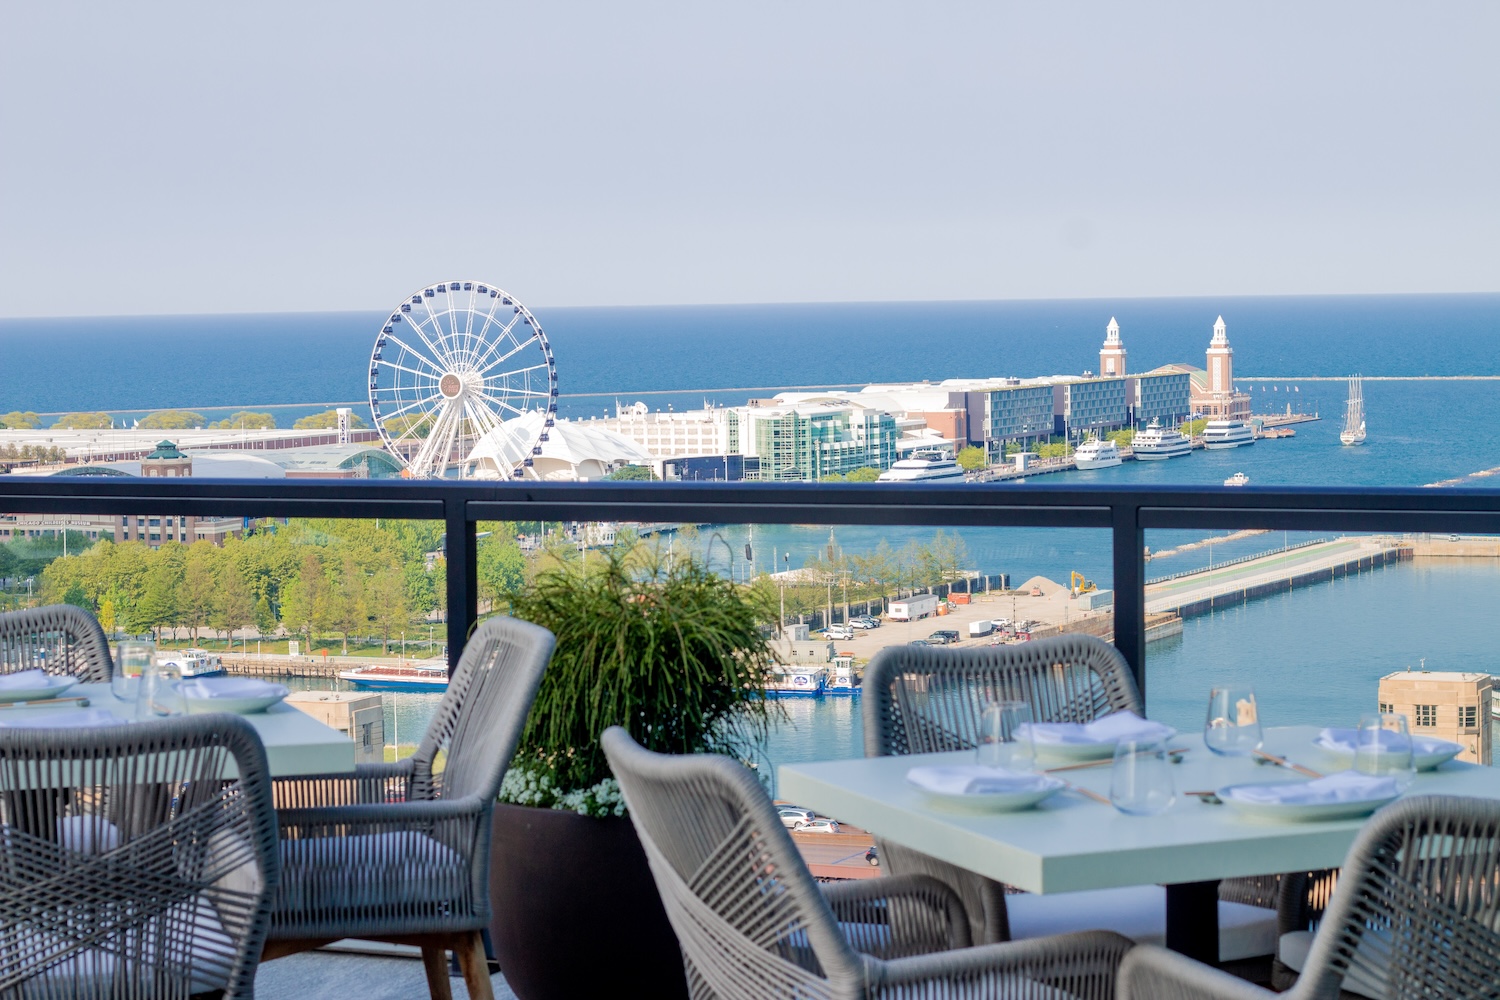 tables, chairs on a terrace, overlooking ferris wheel and boardwalk and ocean